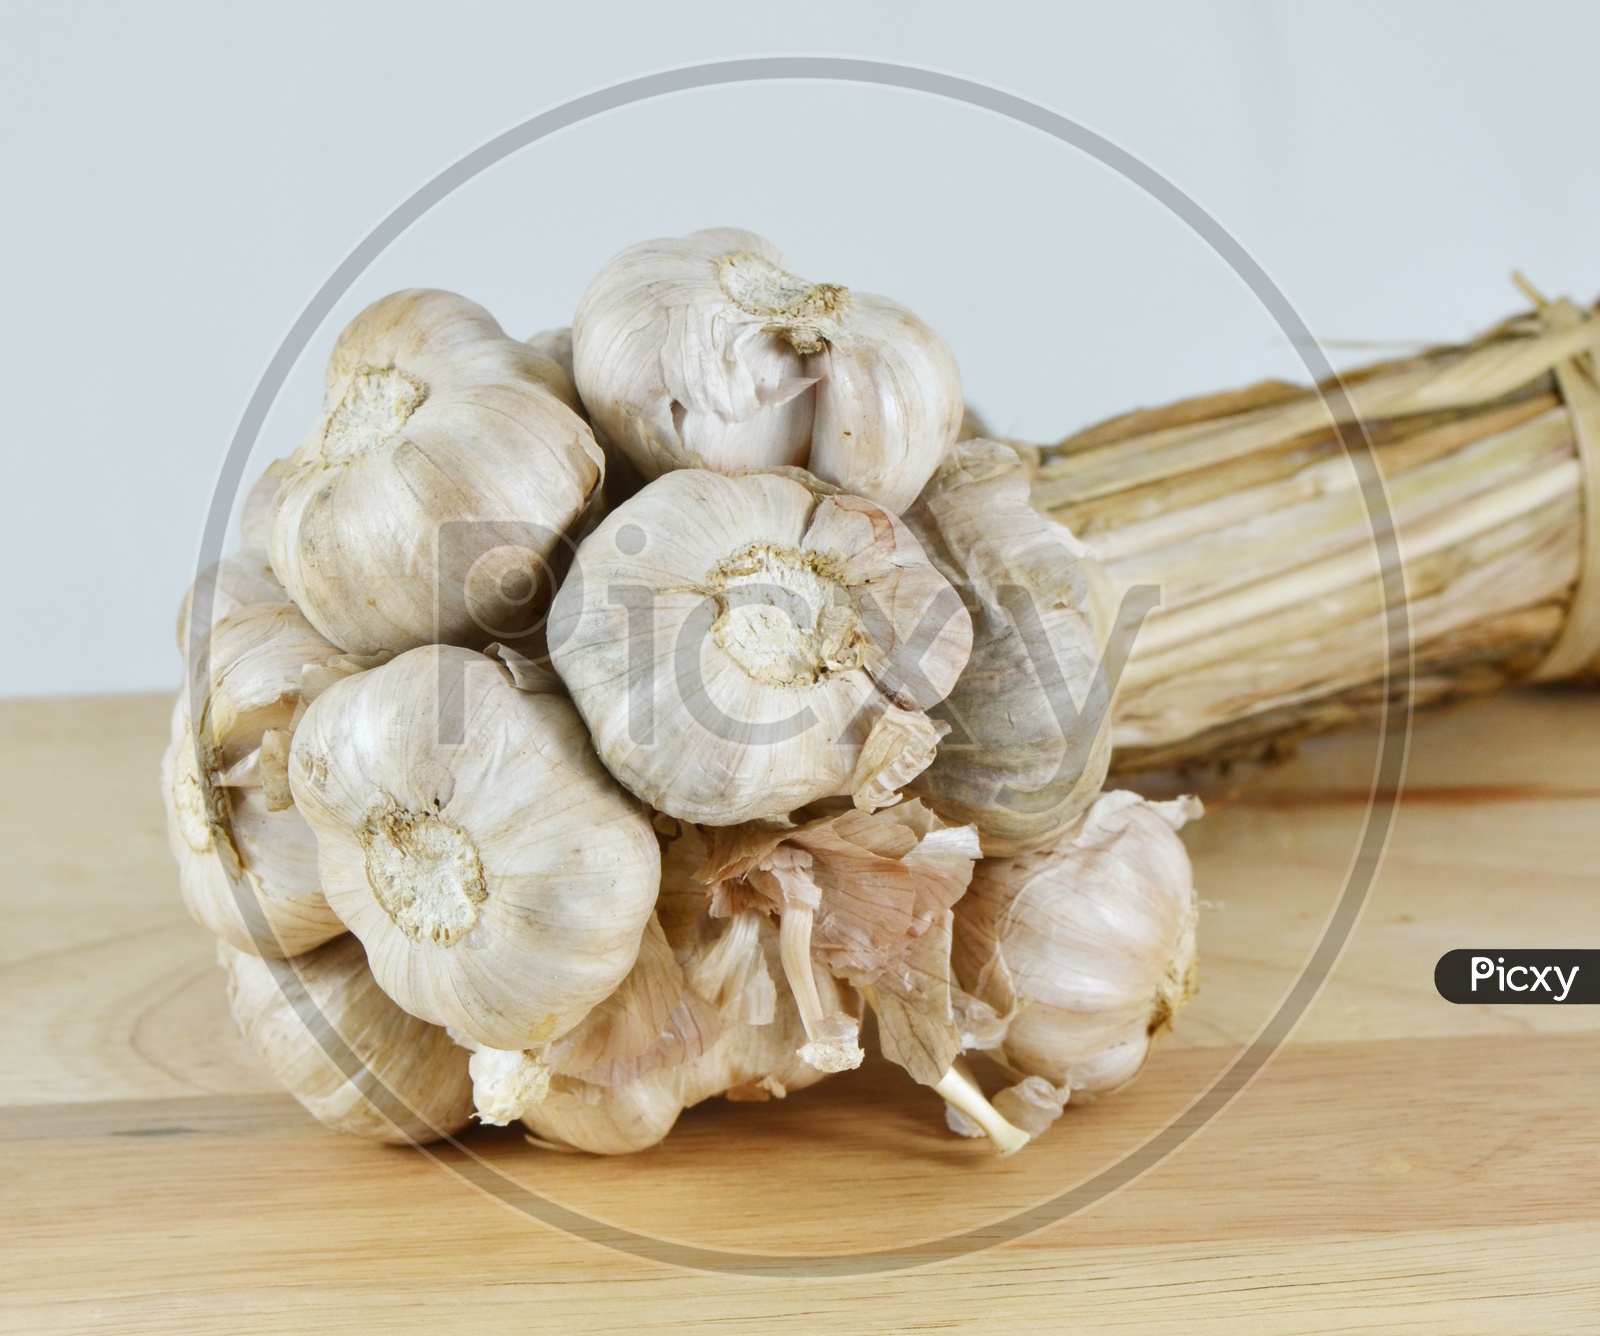 Garlics on a wooden table with a selective focus